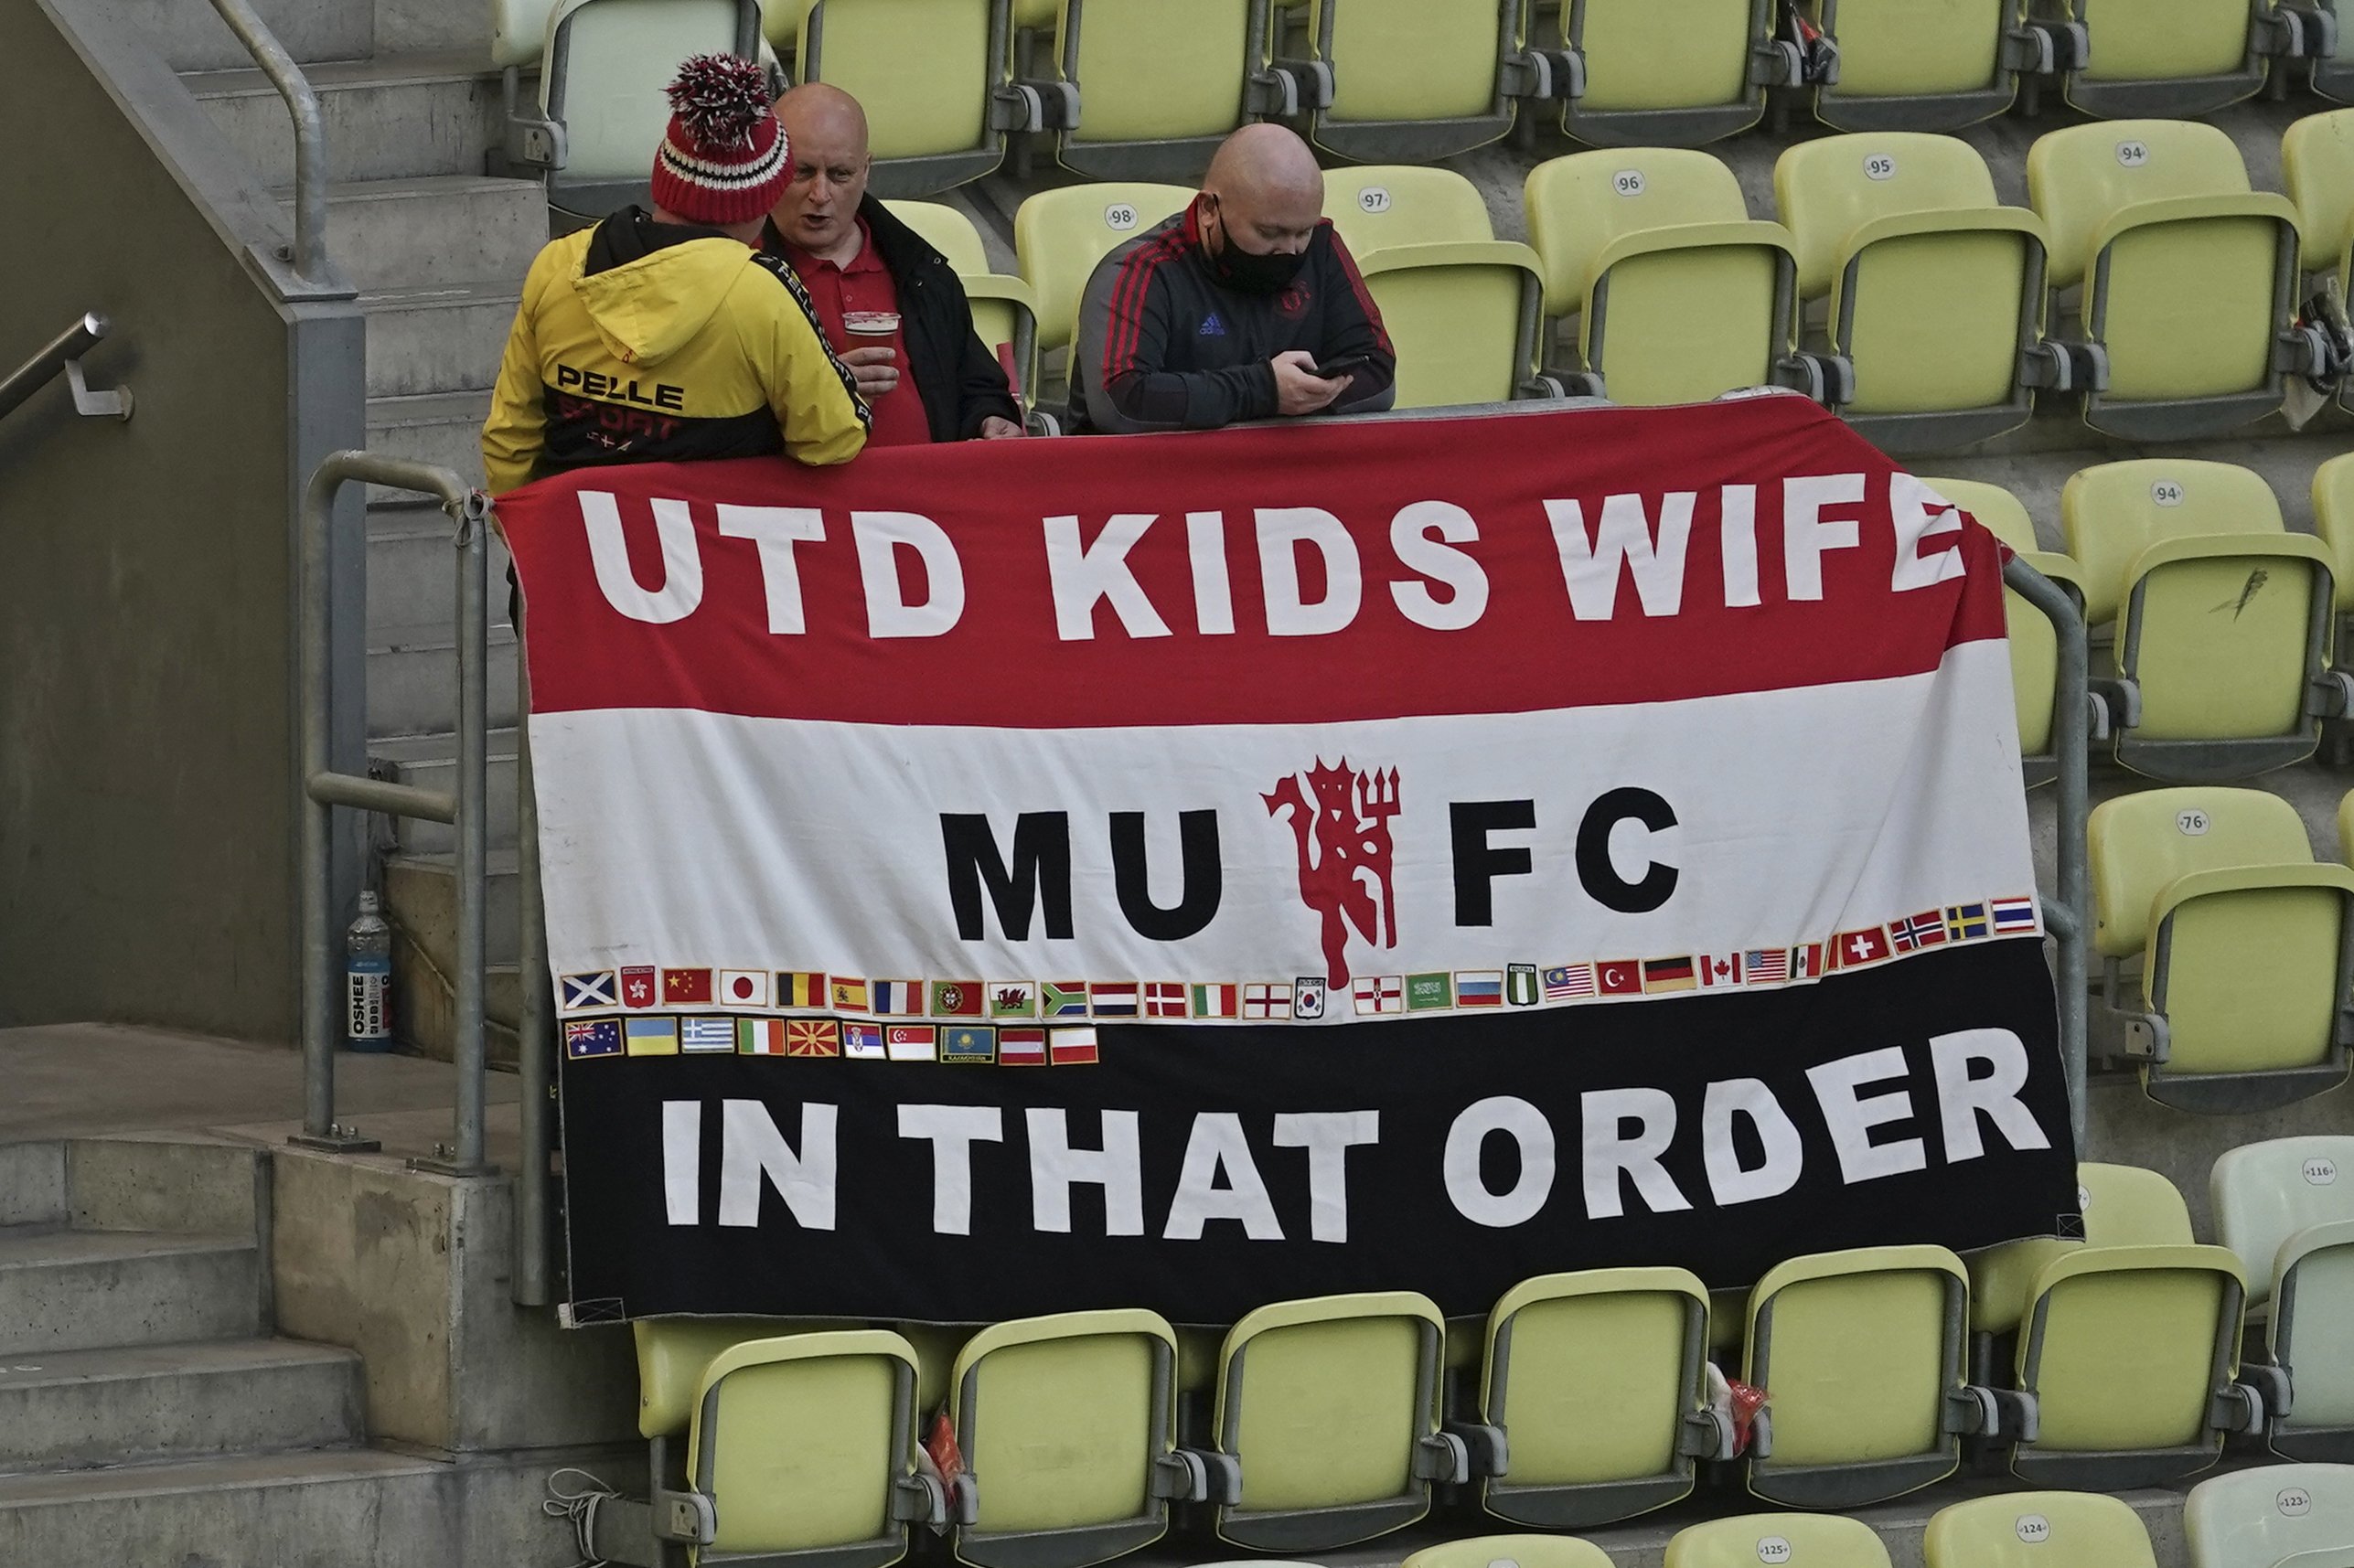 Manchester United supporters wait for the start of the Europa League final soccer match between Manchester United and Villarreal in Gdansk, Poland, May 26, 2021. (AP Photo)